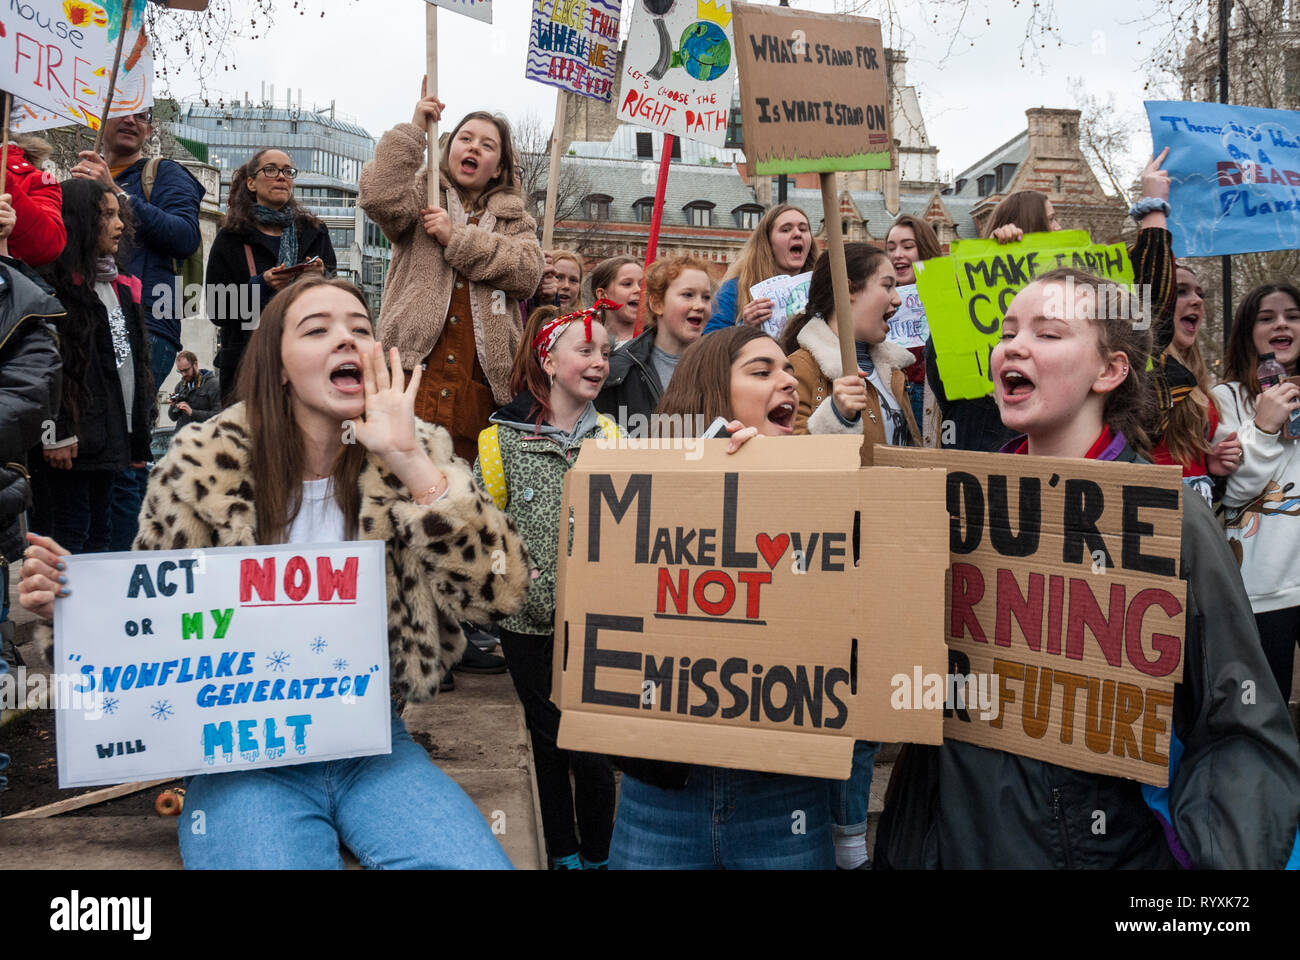 London, UK. 15th March, 2019. School students campaigning against climate change gather outside Parliament, London with colourful home made banners. Credit: Maggie sully/Alamy Live News.London, UK. School children on strike, part of the 'FridaysforFuture' protest against climate change gathering outside Parliament, London. Girls shouting slogans about planet justice and global warming carrying colourful homemade placards 'Act now or my snowflake generation will melt', 'Make love not emissions' and 'Your burning our future'. Stock Photo